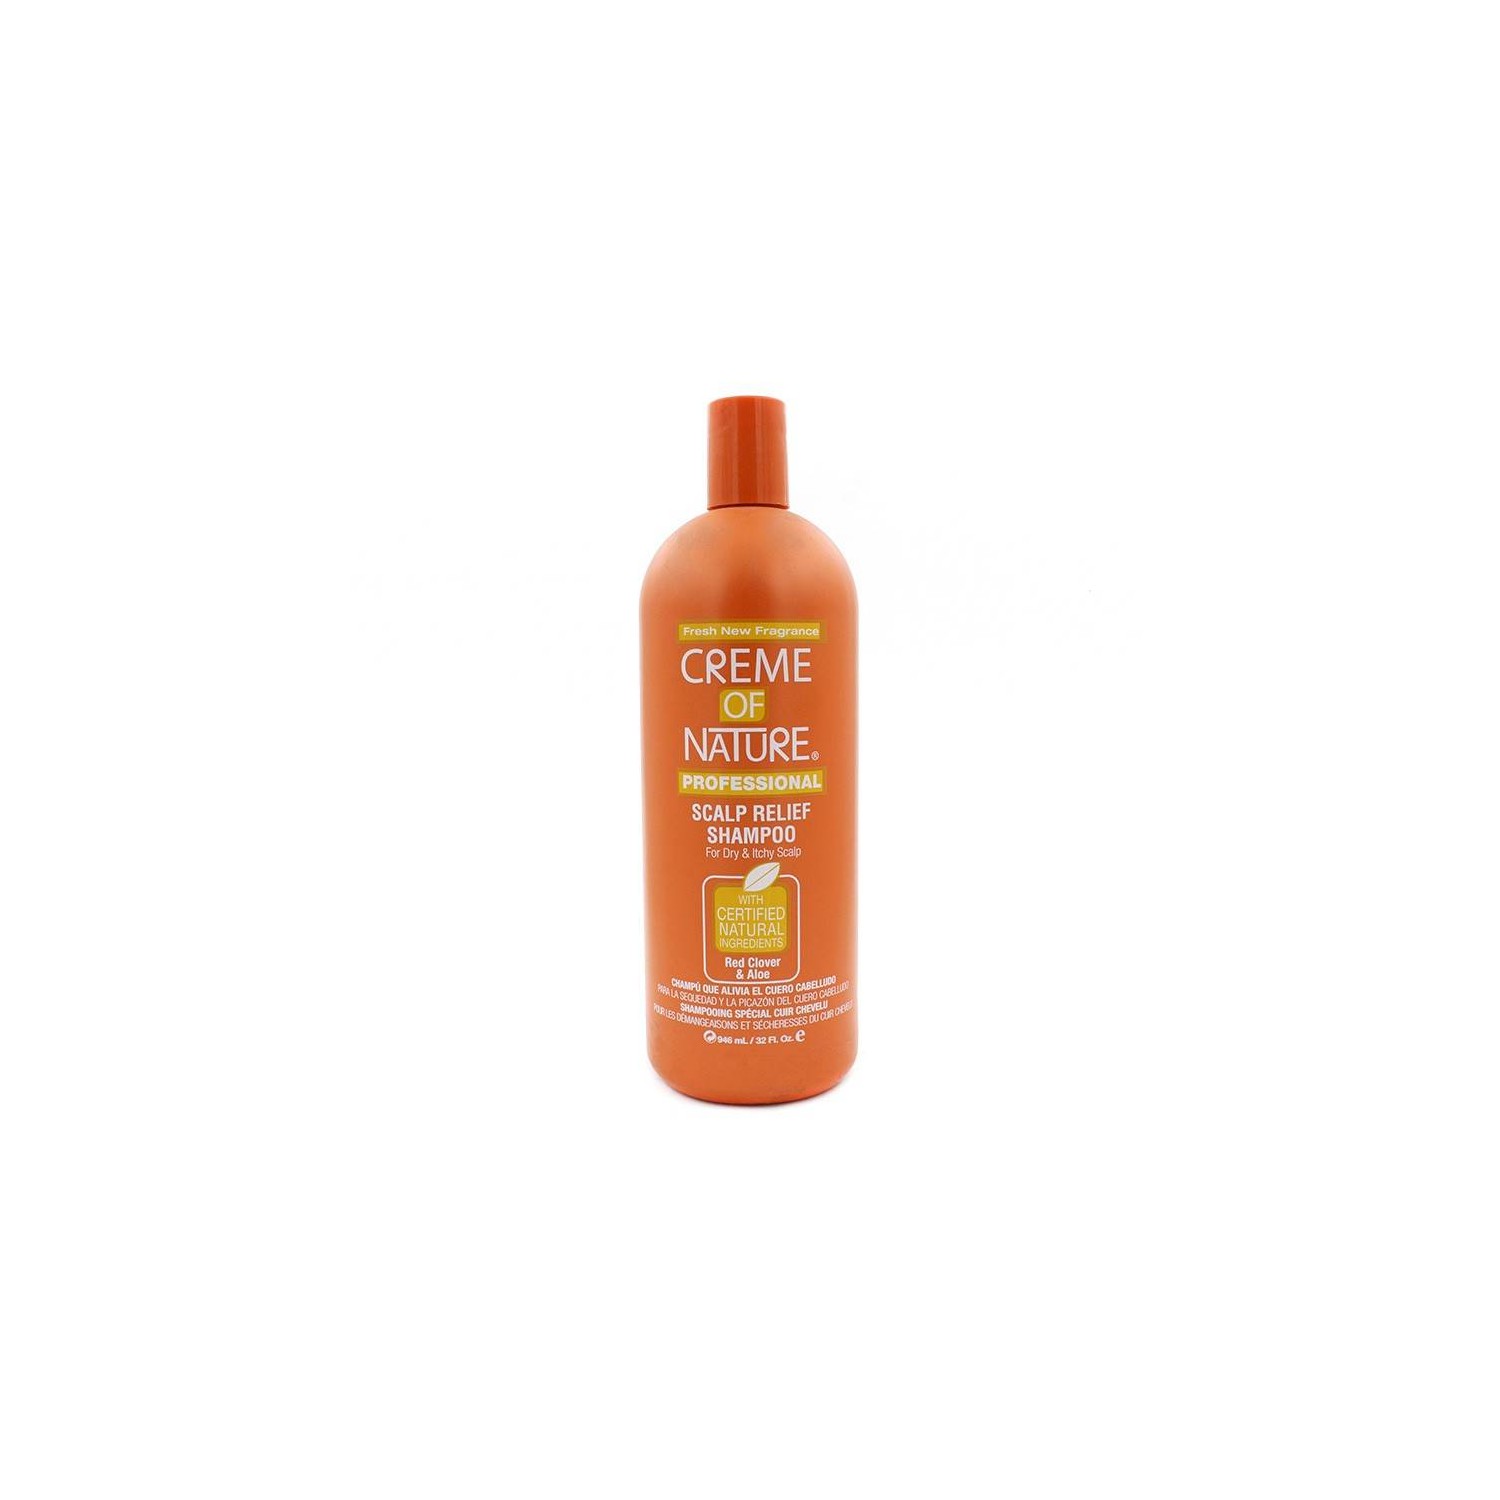 Creme Of Nature Profesional Scalp Relief Champú 946 ml